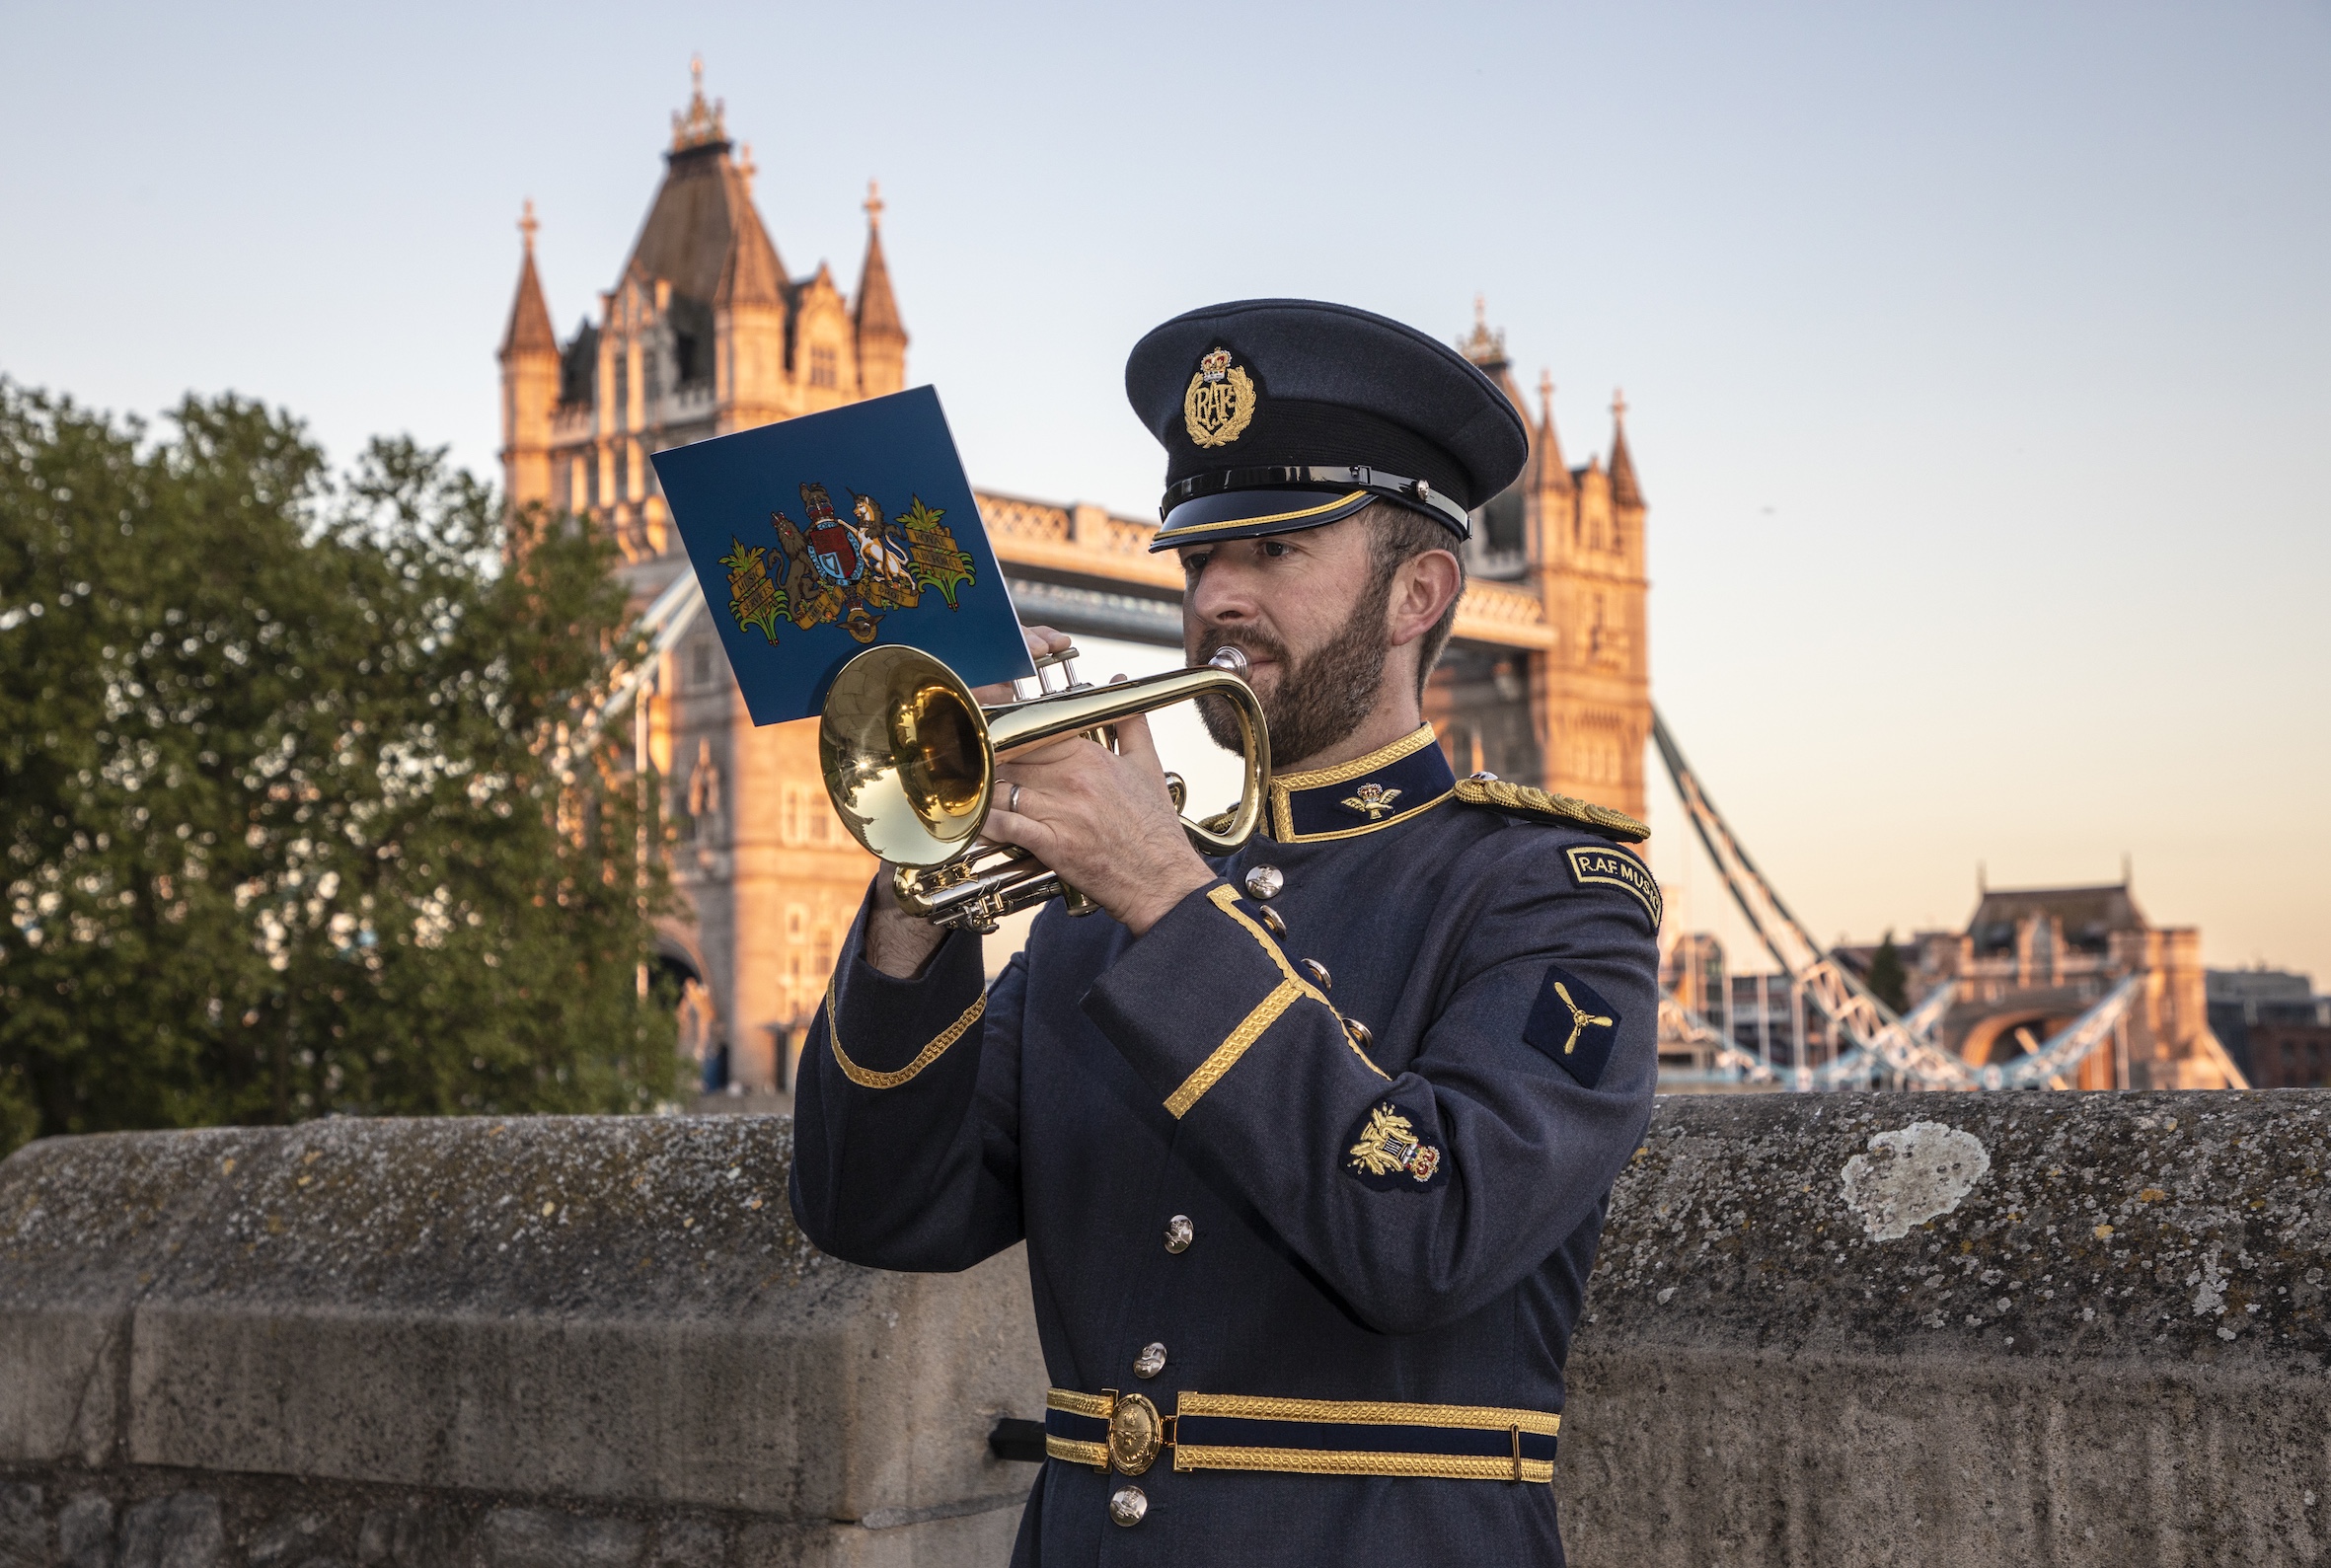 “If I can join the RAF as a Musician at the age of 42, anyone can!” Air Specialist (Class 1) Alan Thomas.